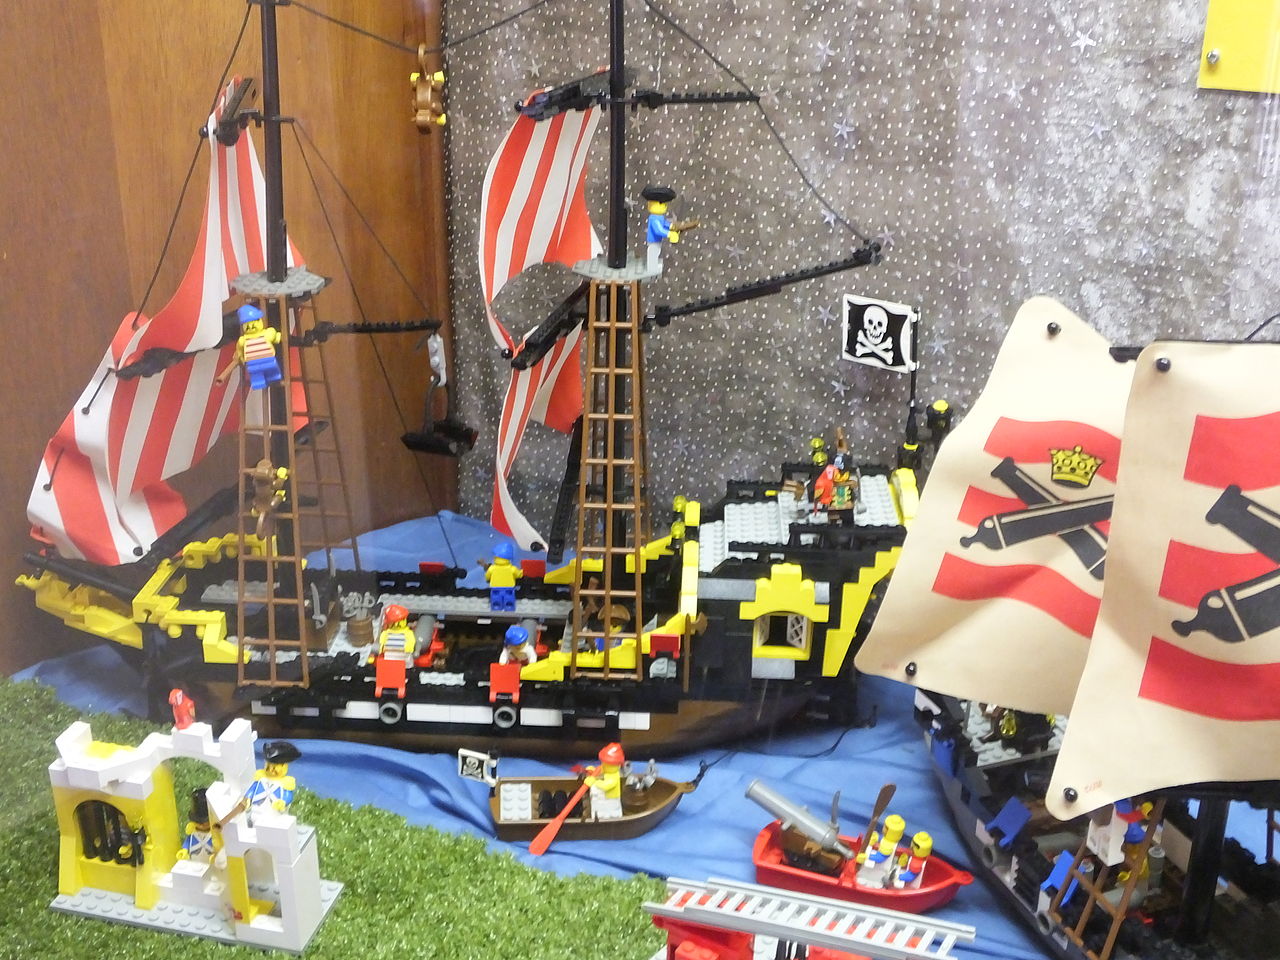 File:JLL Childhood Collection- of Lego- Pirate Lego 2760.JPG - Wikimedia Commons